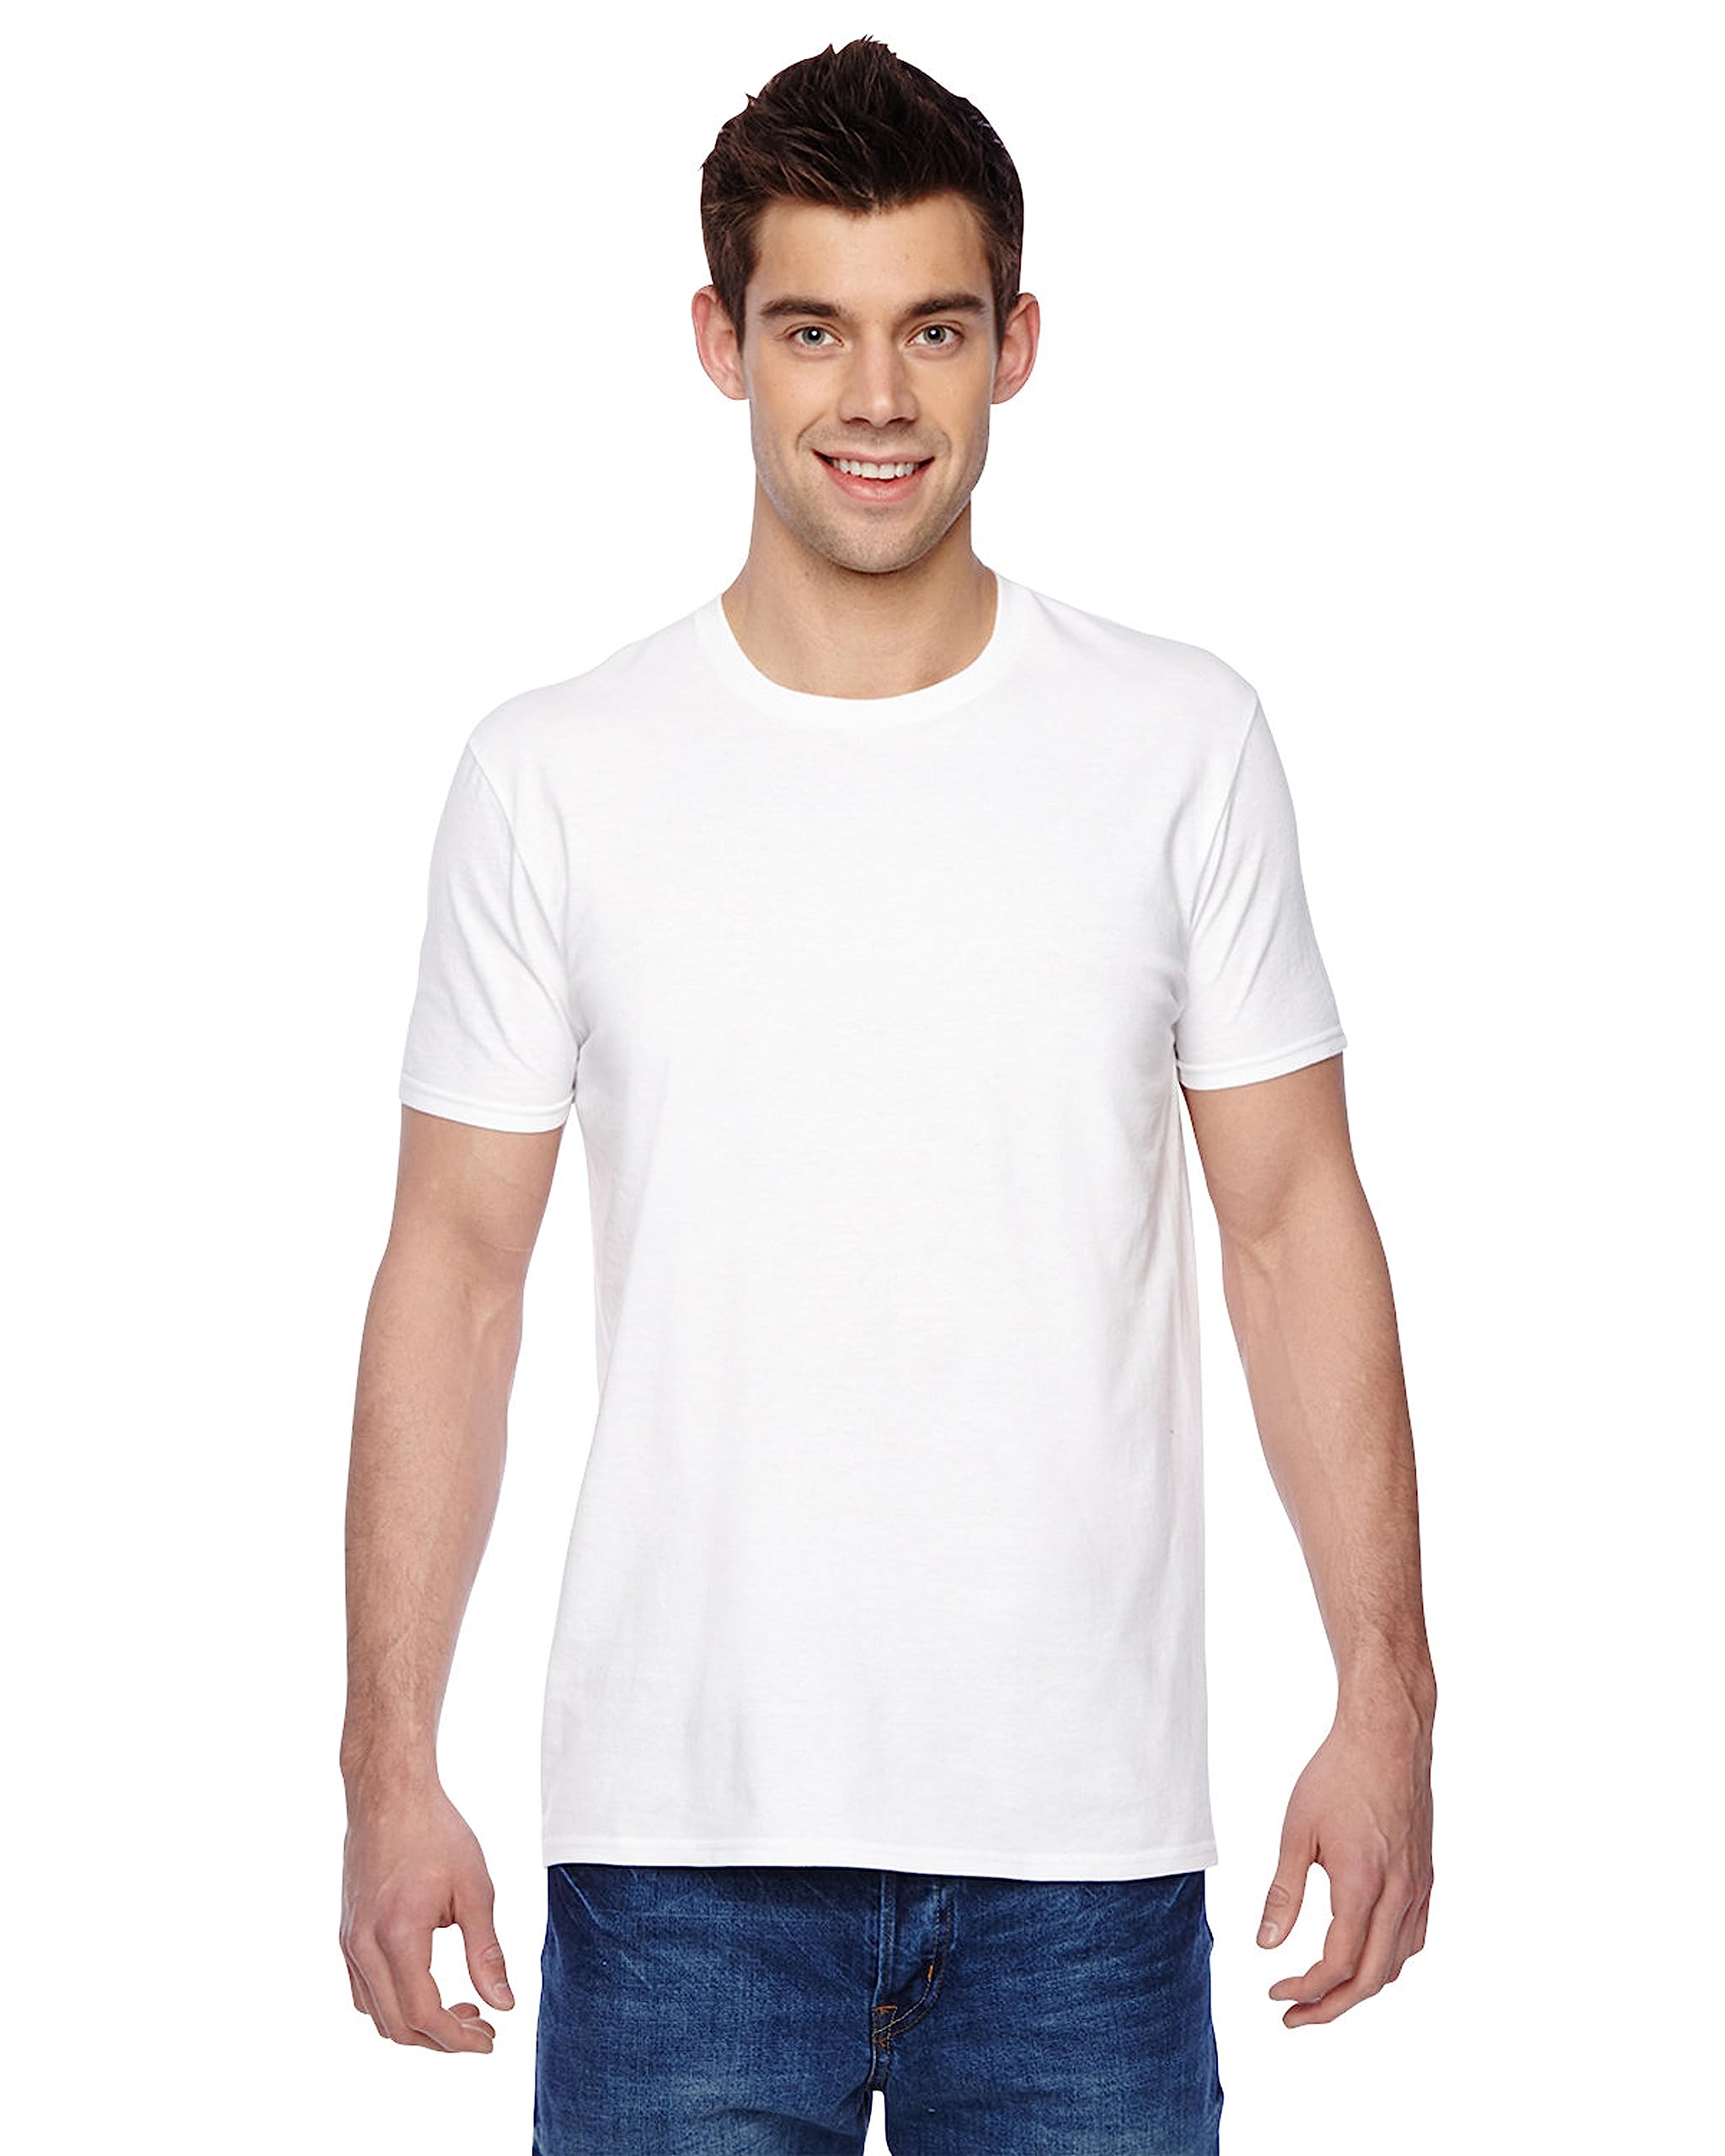 Fruit of the Loom Men's Stay Tucked Crew T-Shirt Extended Sizes